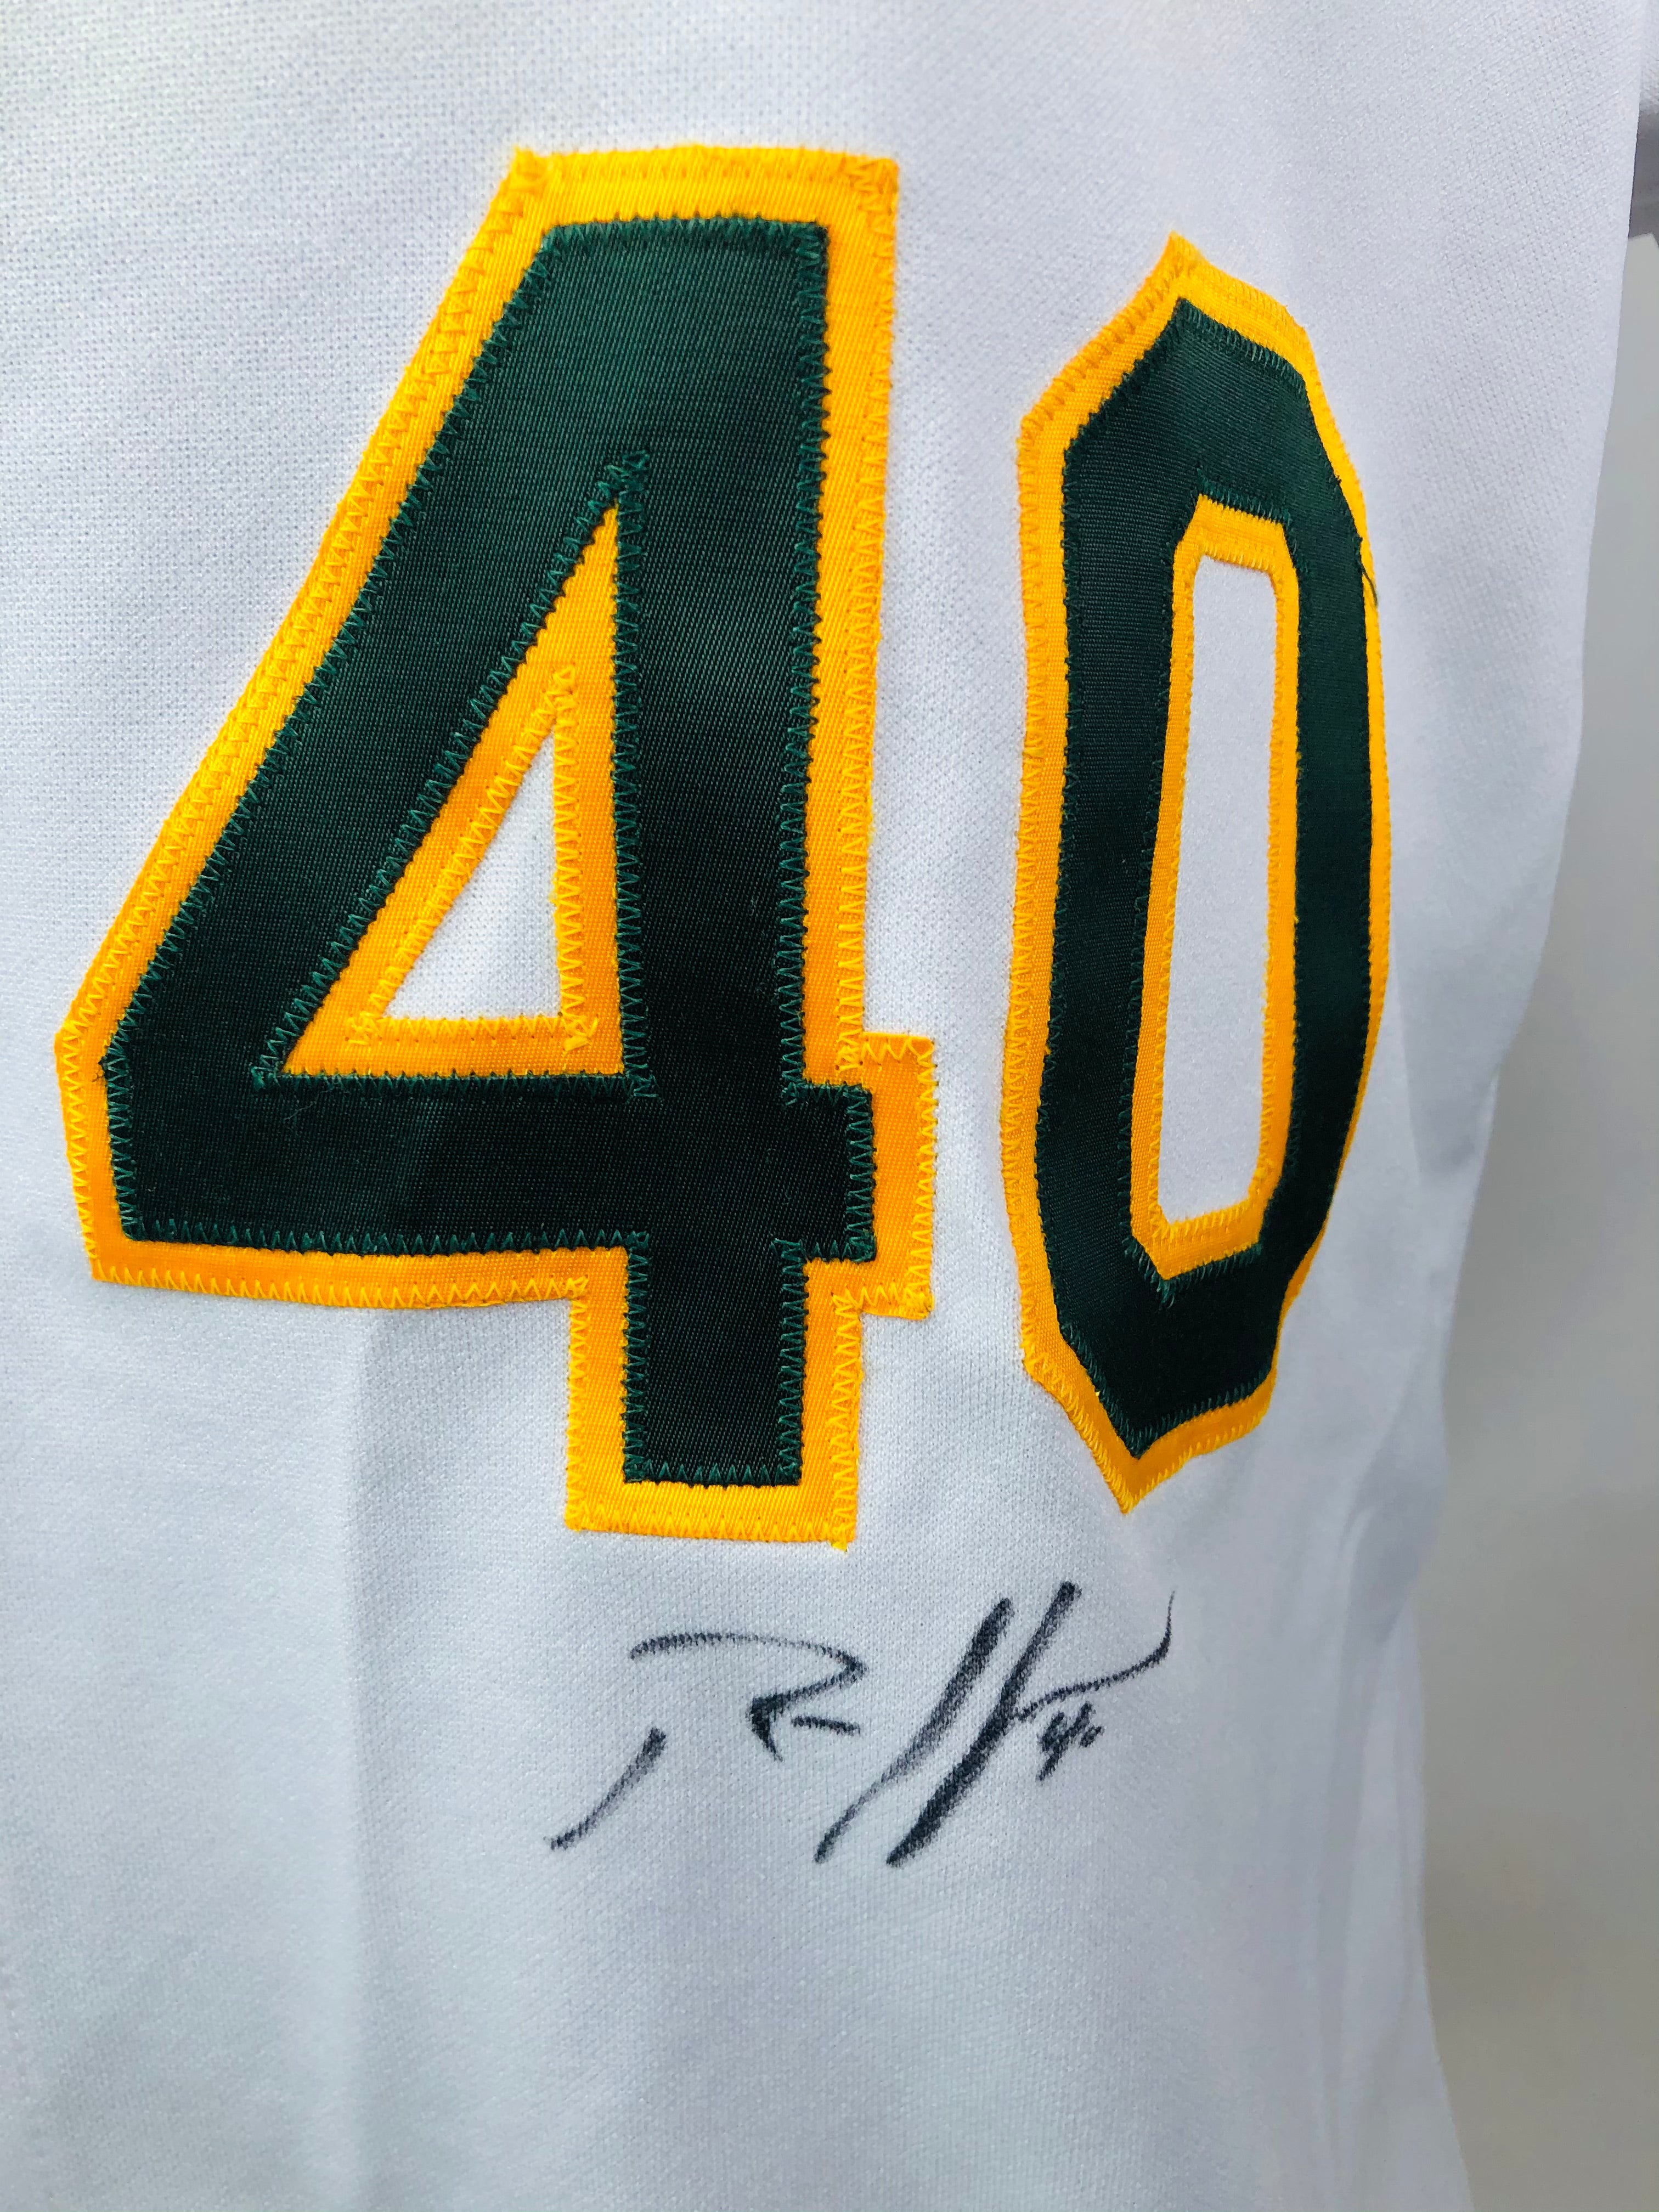 RICH HARDEN OAKLAND ATHLETICS VINTAGE 2000'S TEAM ISSUED SIGNED AUTHEN -  Bucks County Baseball Co.